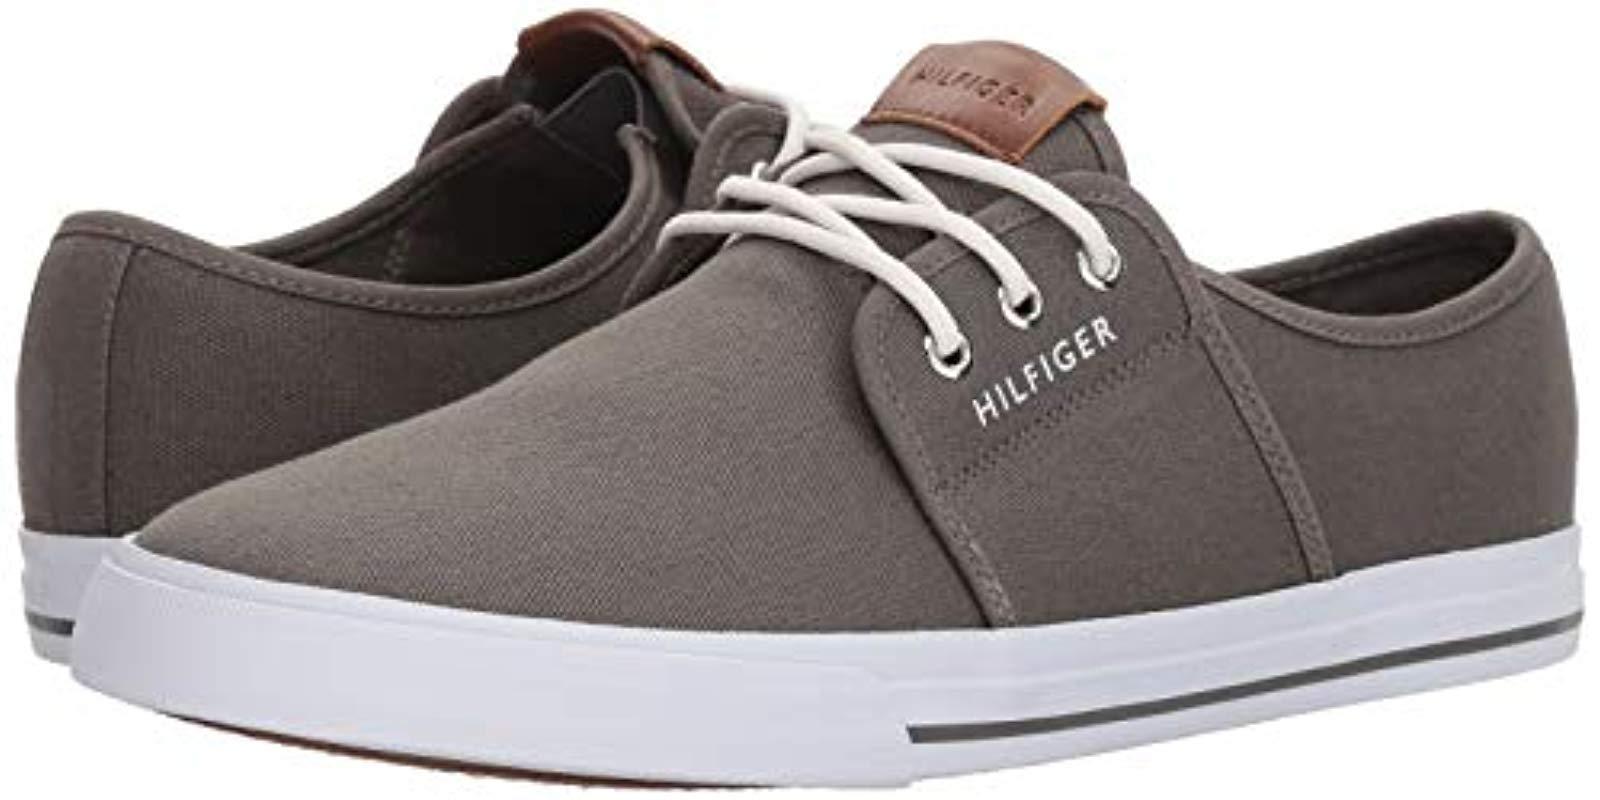 Tommy Hilfiger Canvas Pala Sneaker in 